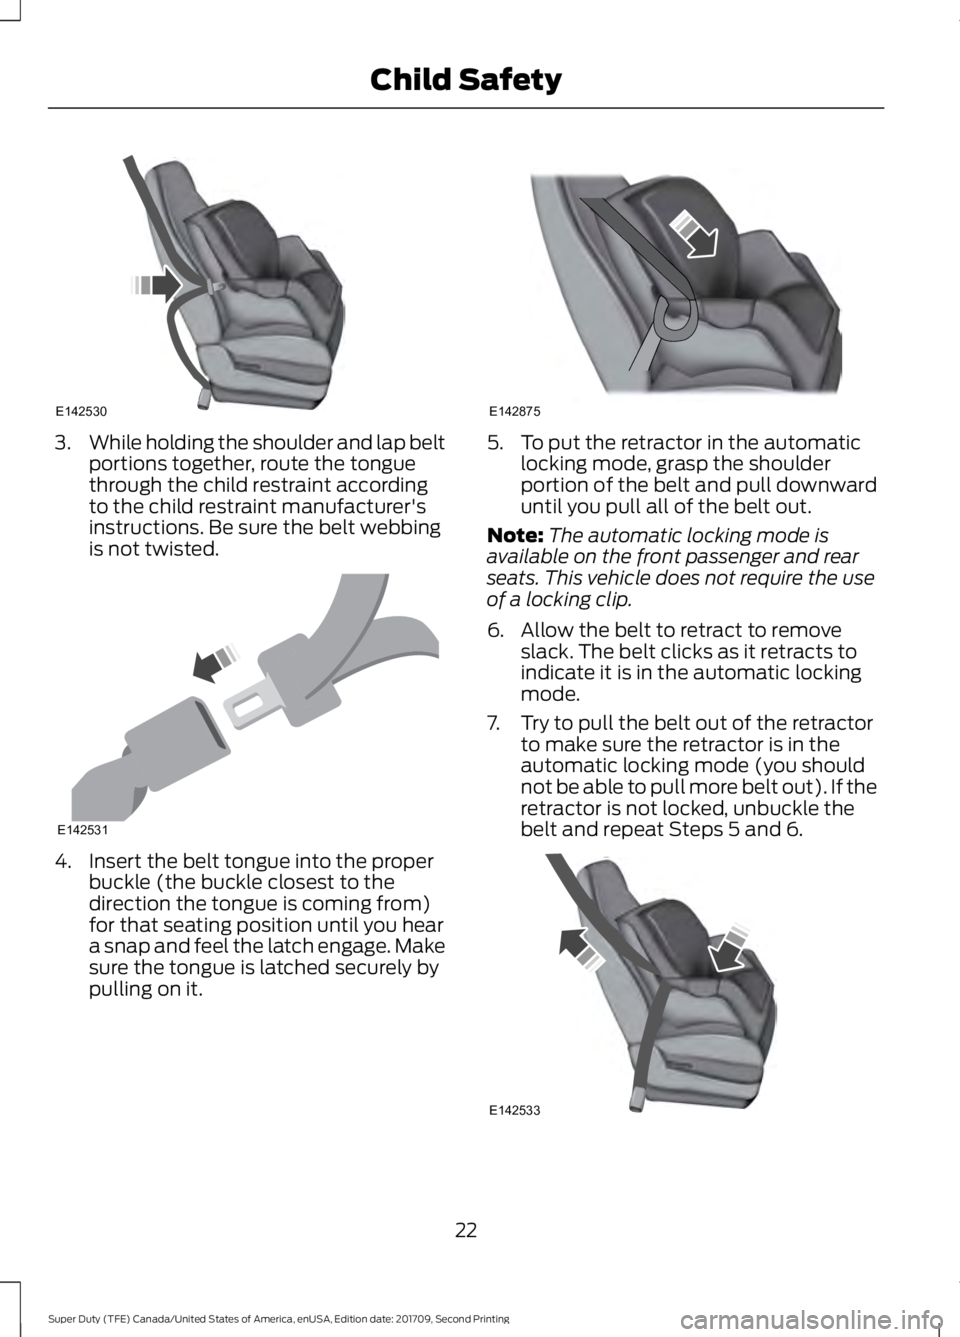 FORD F-450 2018  Owners Manual 3.
While holding the shoulder and lap belt
portions together, route the tongue
through the child restraint according
to the child restraint manufacturer's
instructions. Be sure the belt webbing
is